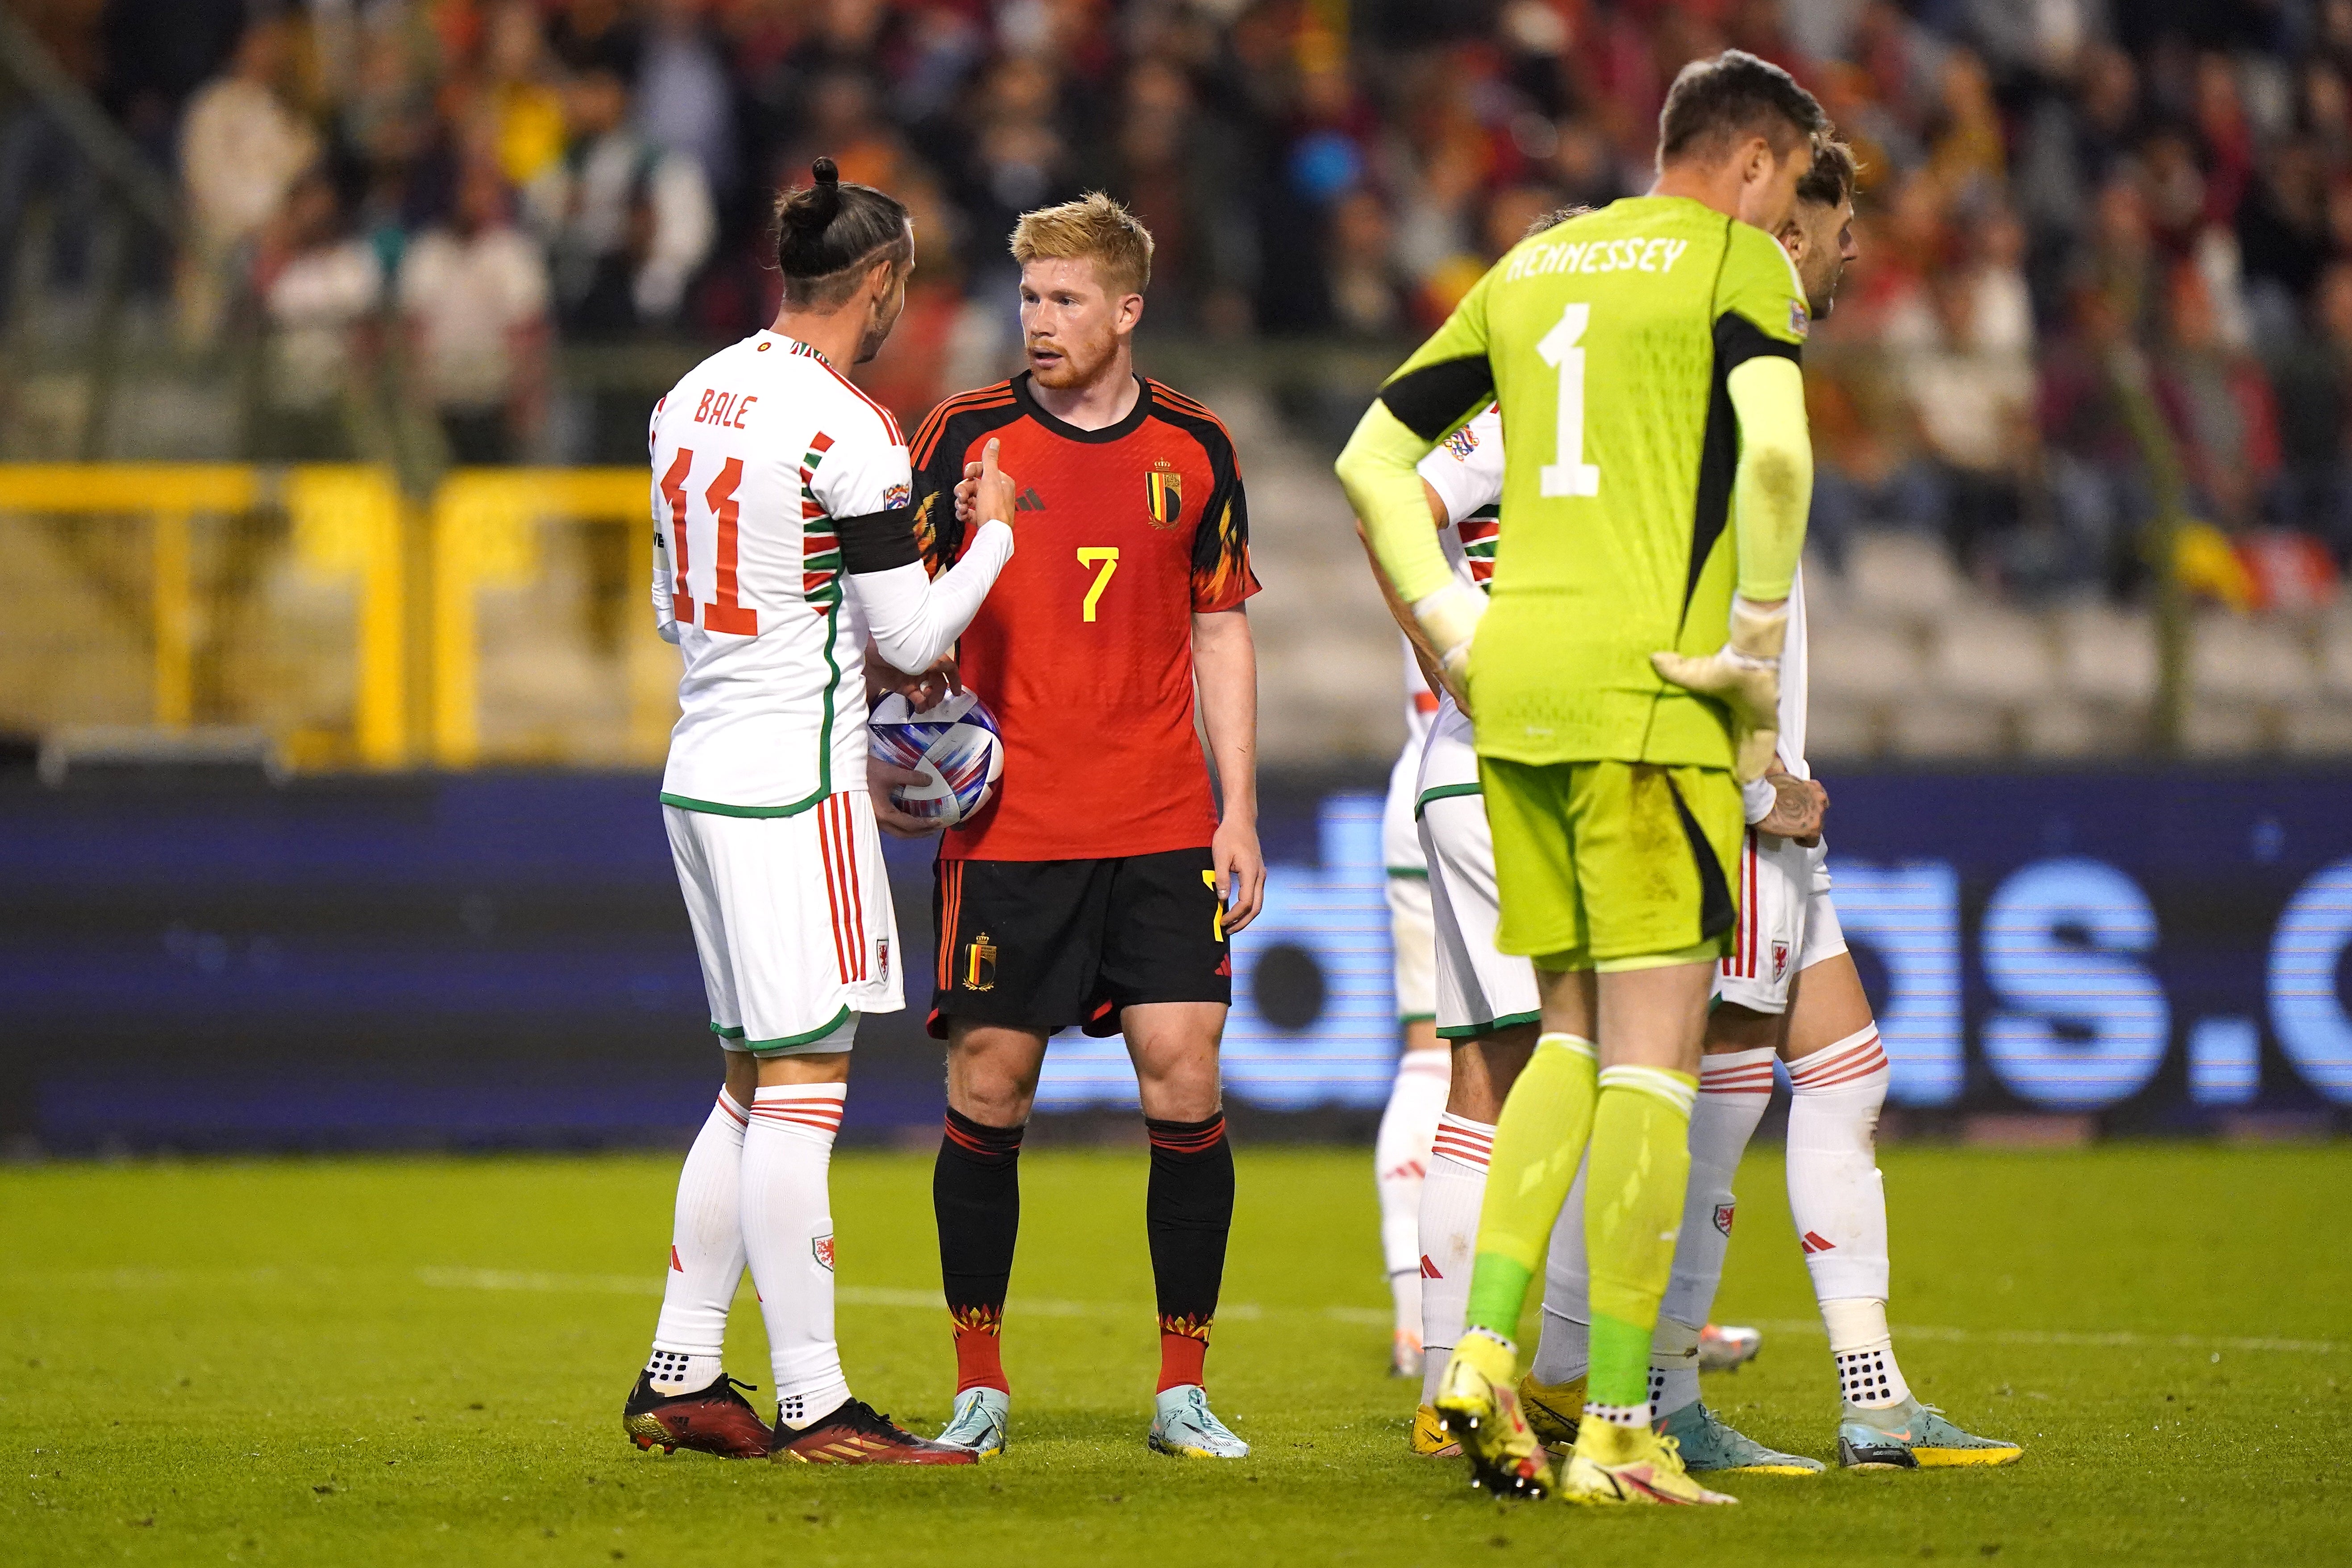 Wales’ Gareth Bale, left, and Belgium’s Kevin De Bruyne in discussion during the match in Brussels (Tim Goode/PA)